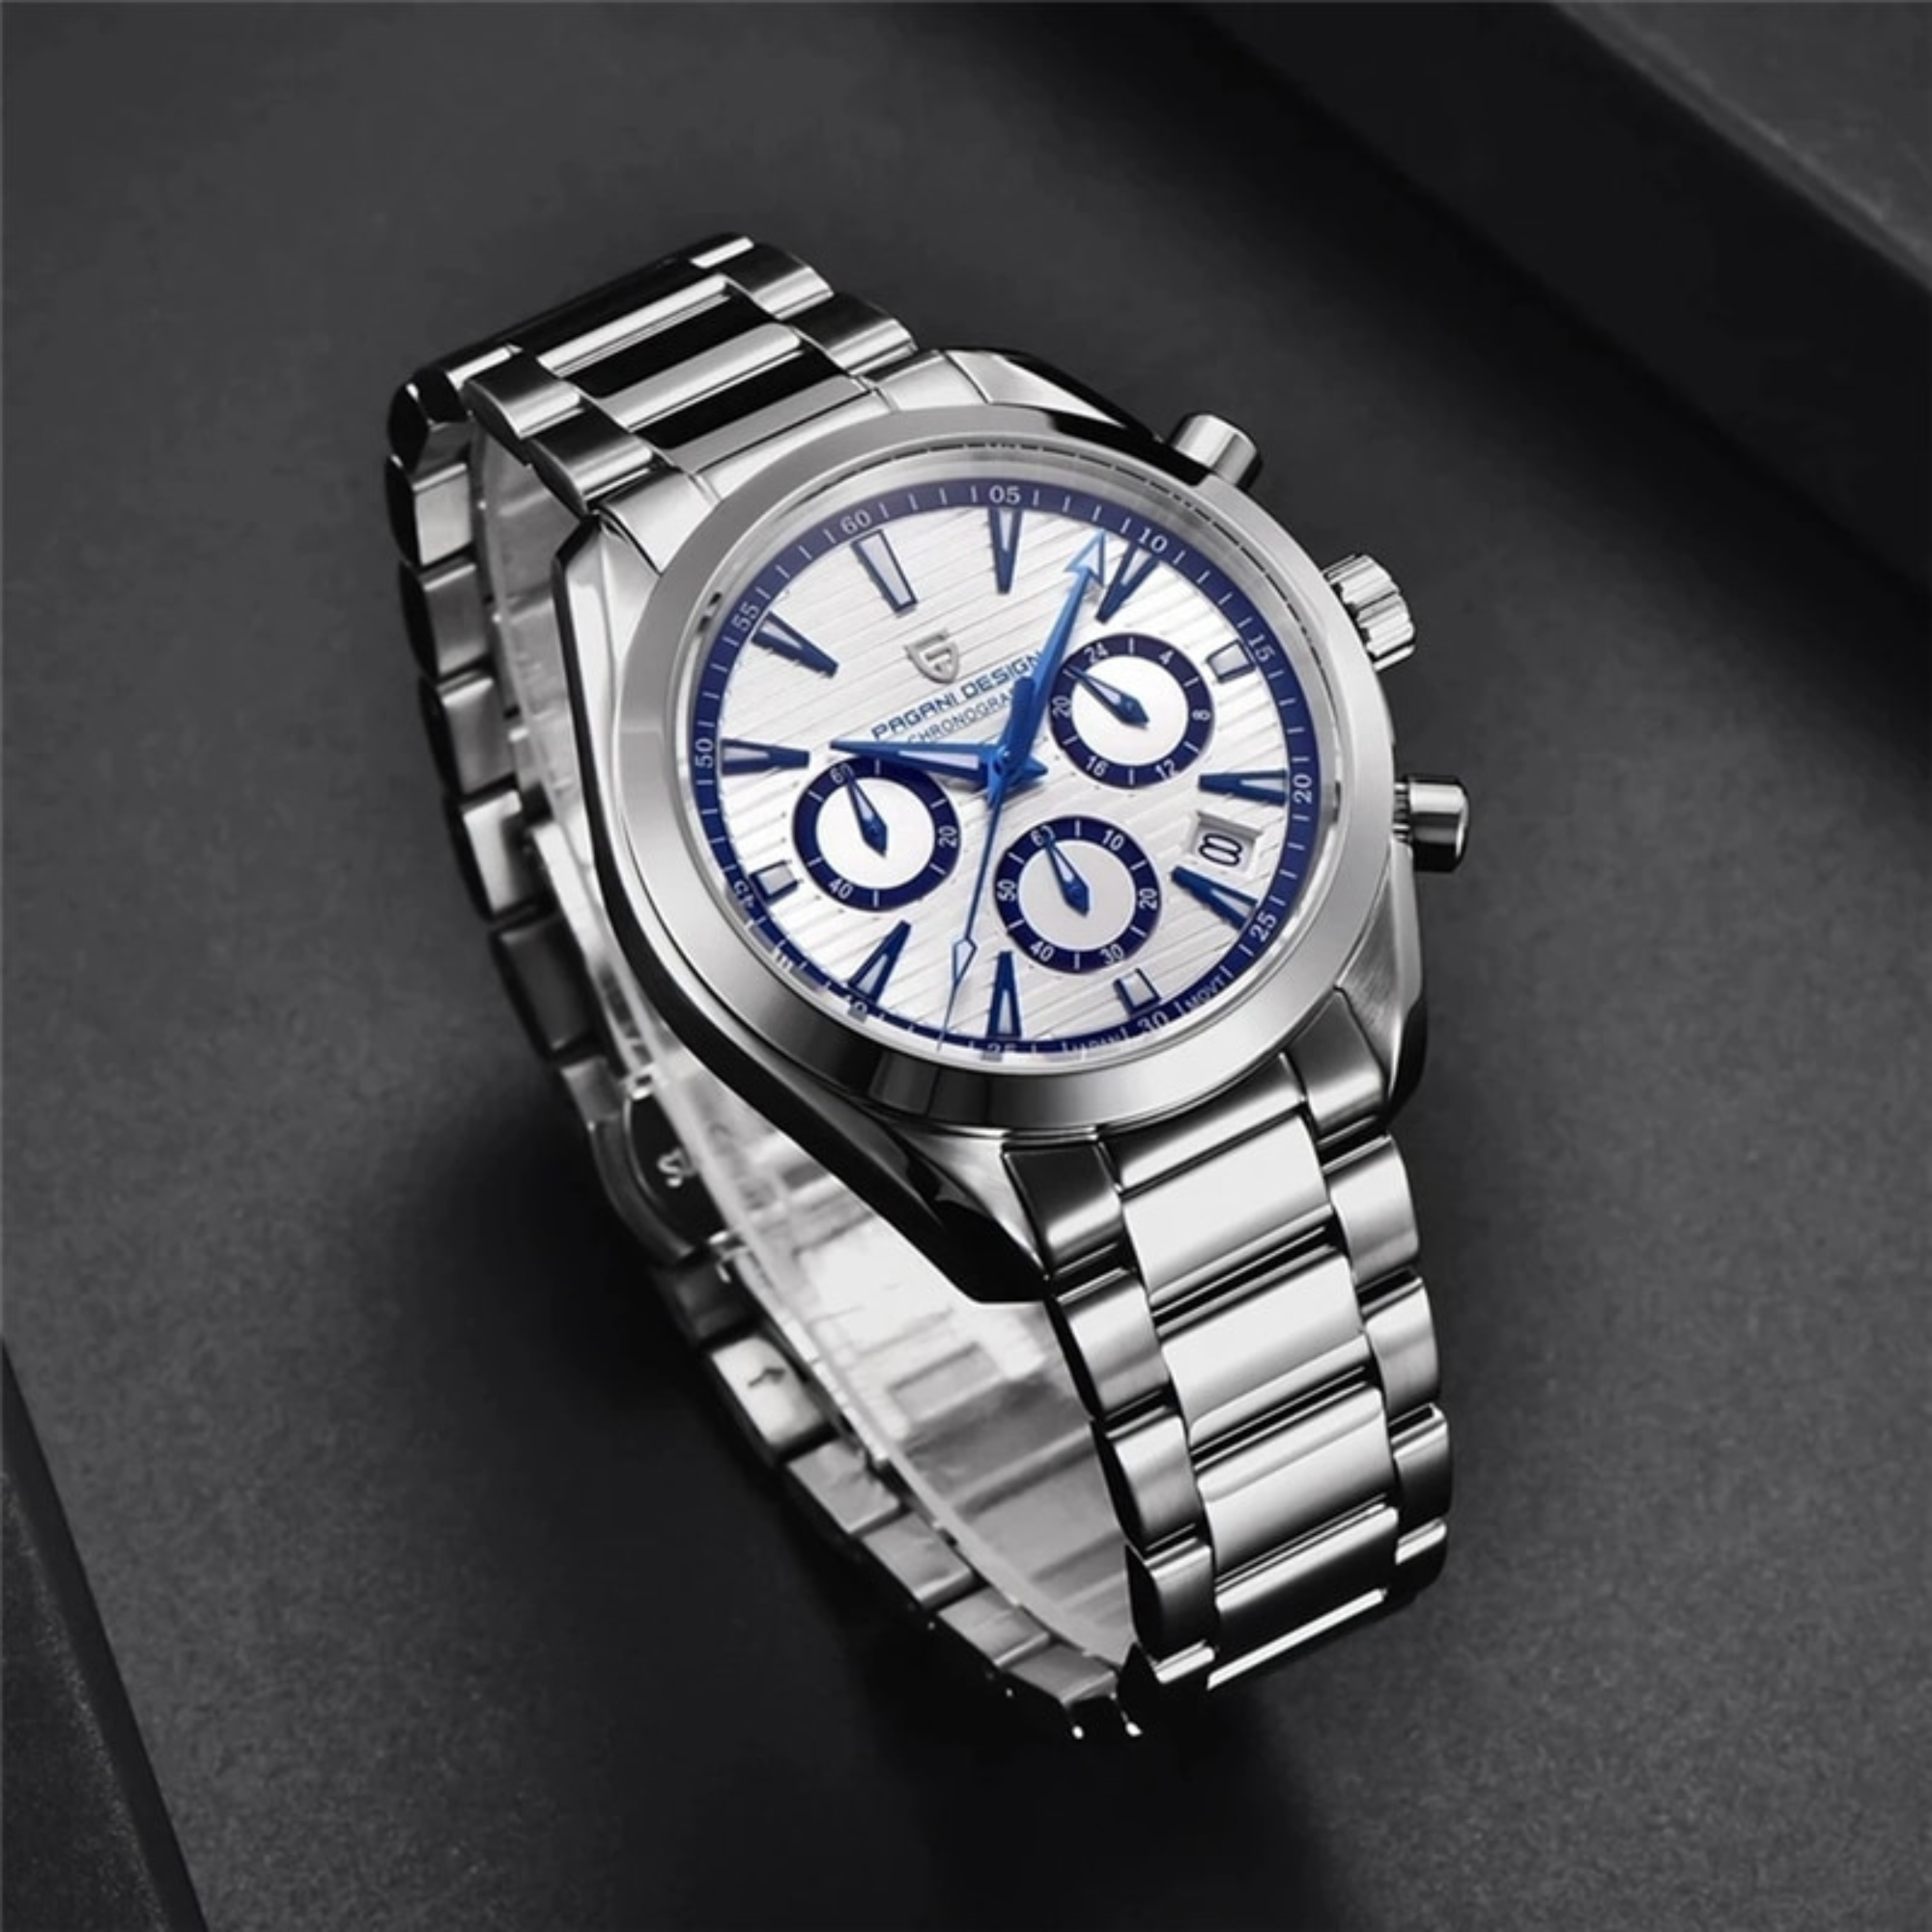 Pagani Design PD-1712 Chronograph Luxury Waterproof Stainless Steel Men's Watch 40MM Watch (Movement Japanese VK63) White Dial